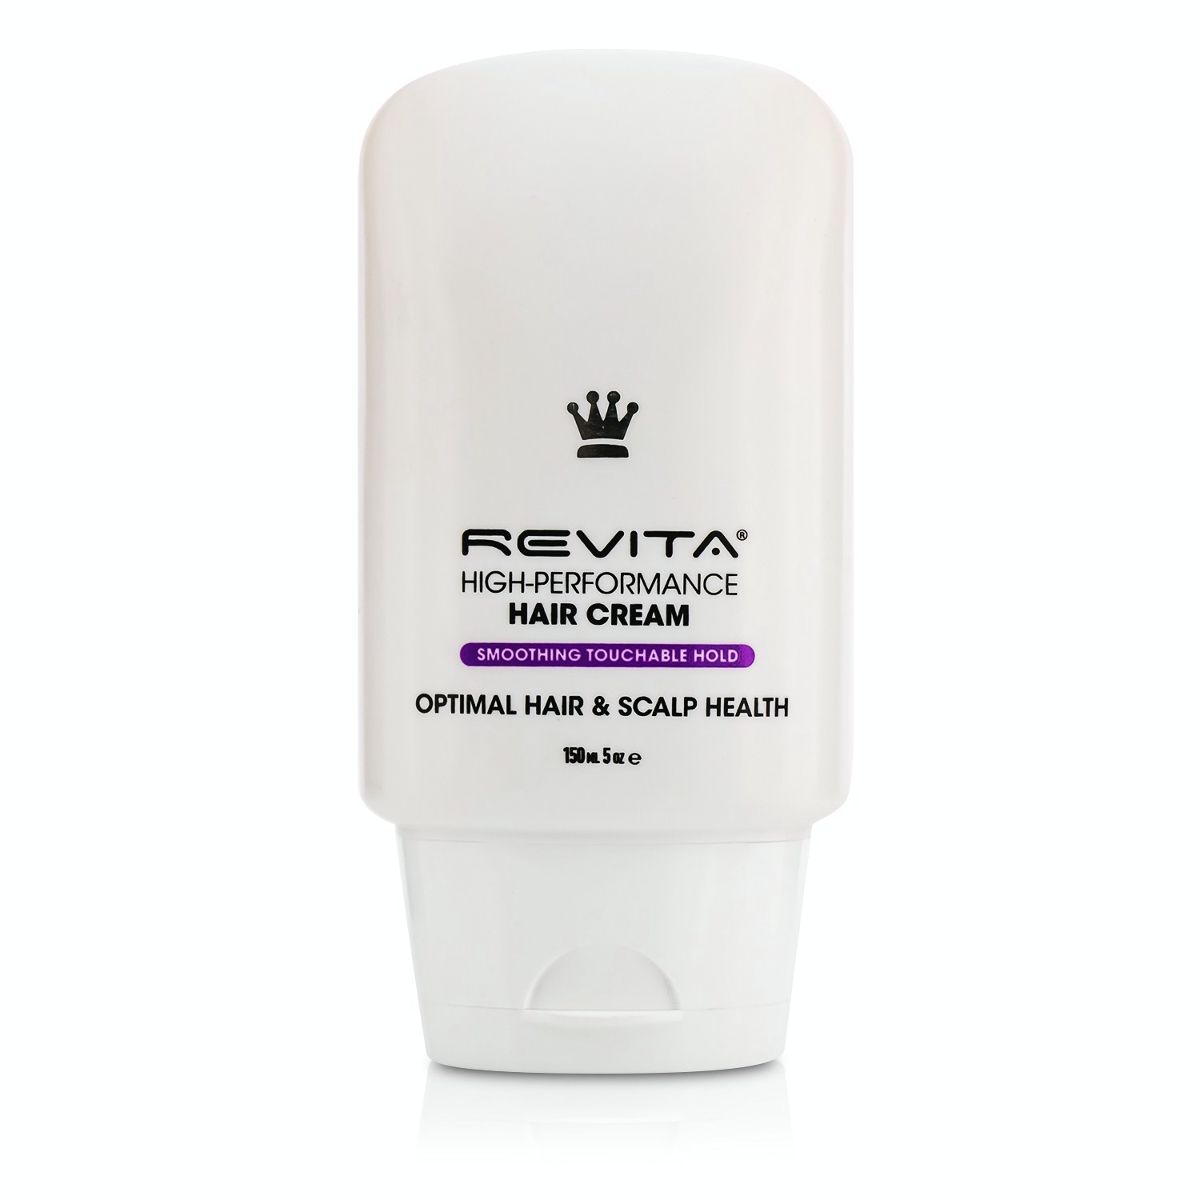 Revita High-Performance Hair Cream - Smoothing Touchable Hold (Exp. Date: 10/2017) DS Laboratories Image